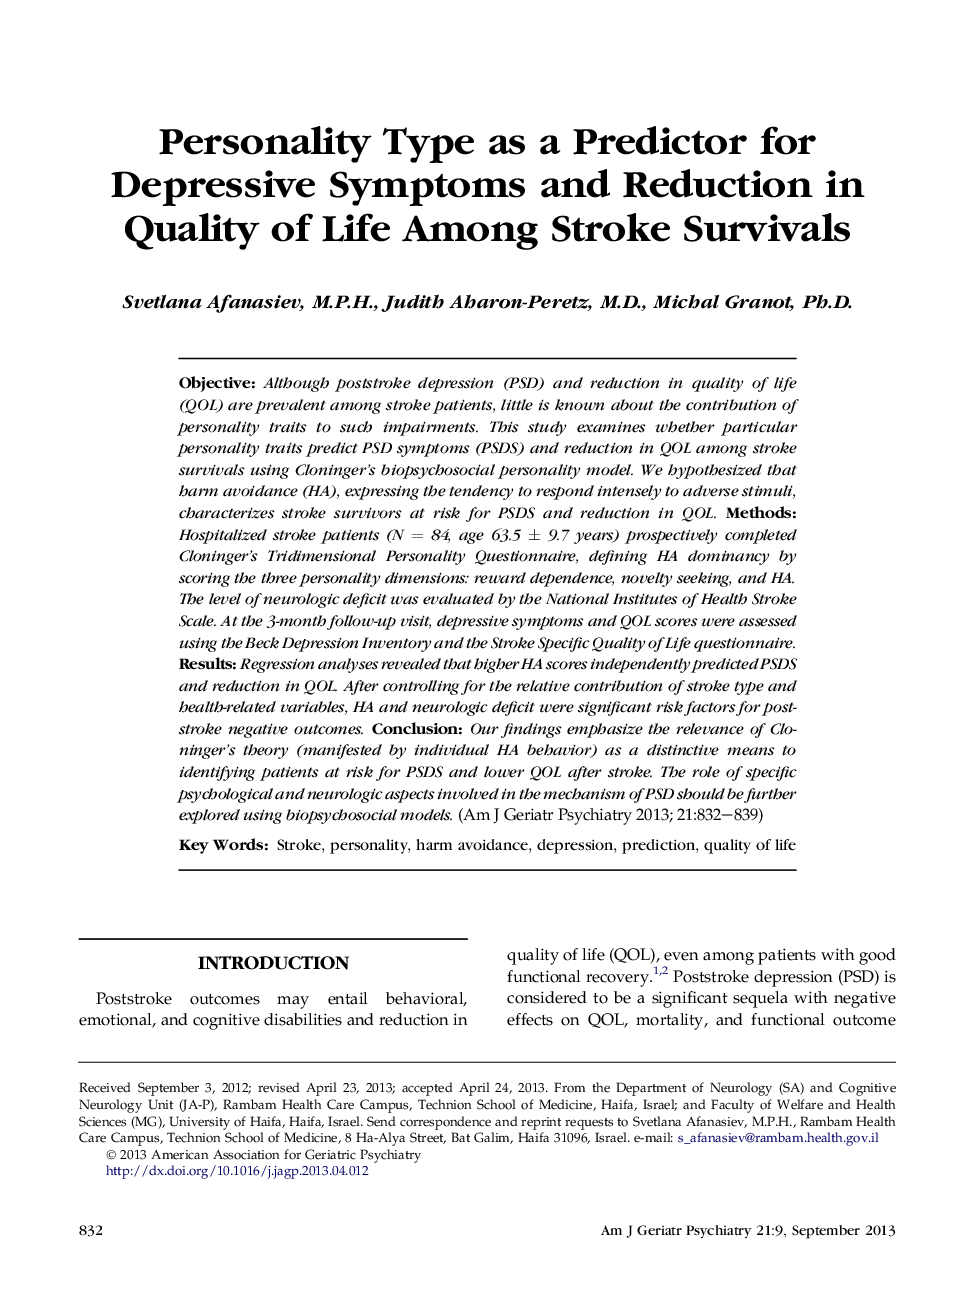 Personality Type as a Predictor for Depressive Symptoms and Reduction in Quality of Life Among Stroke Survivals